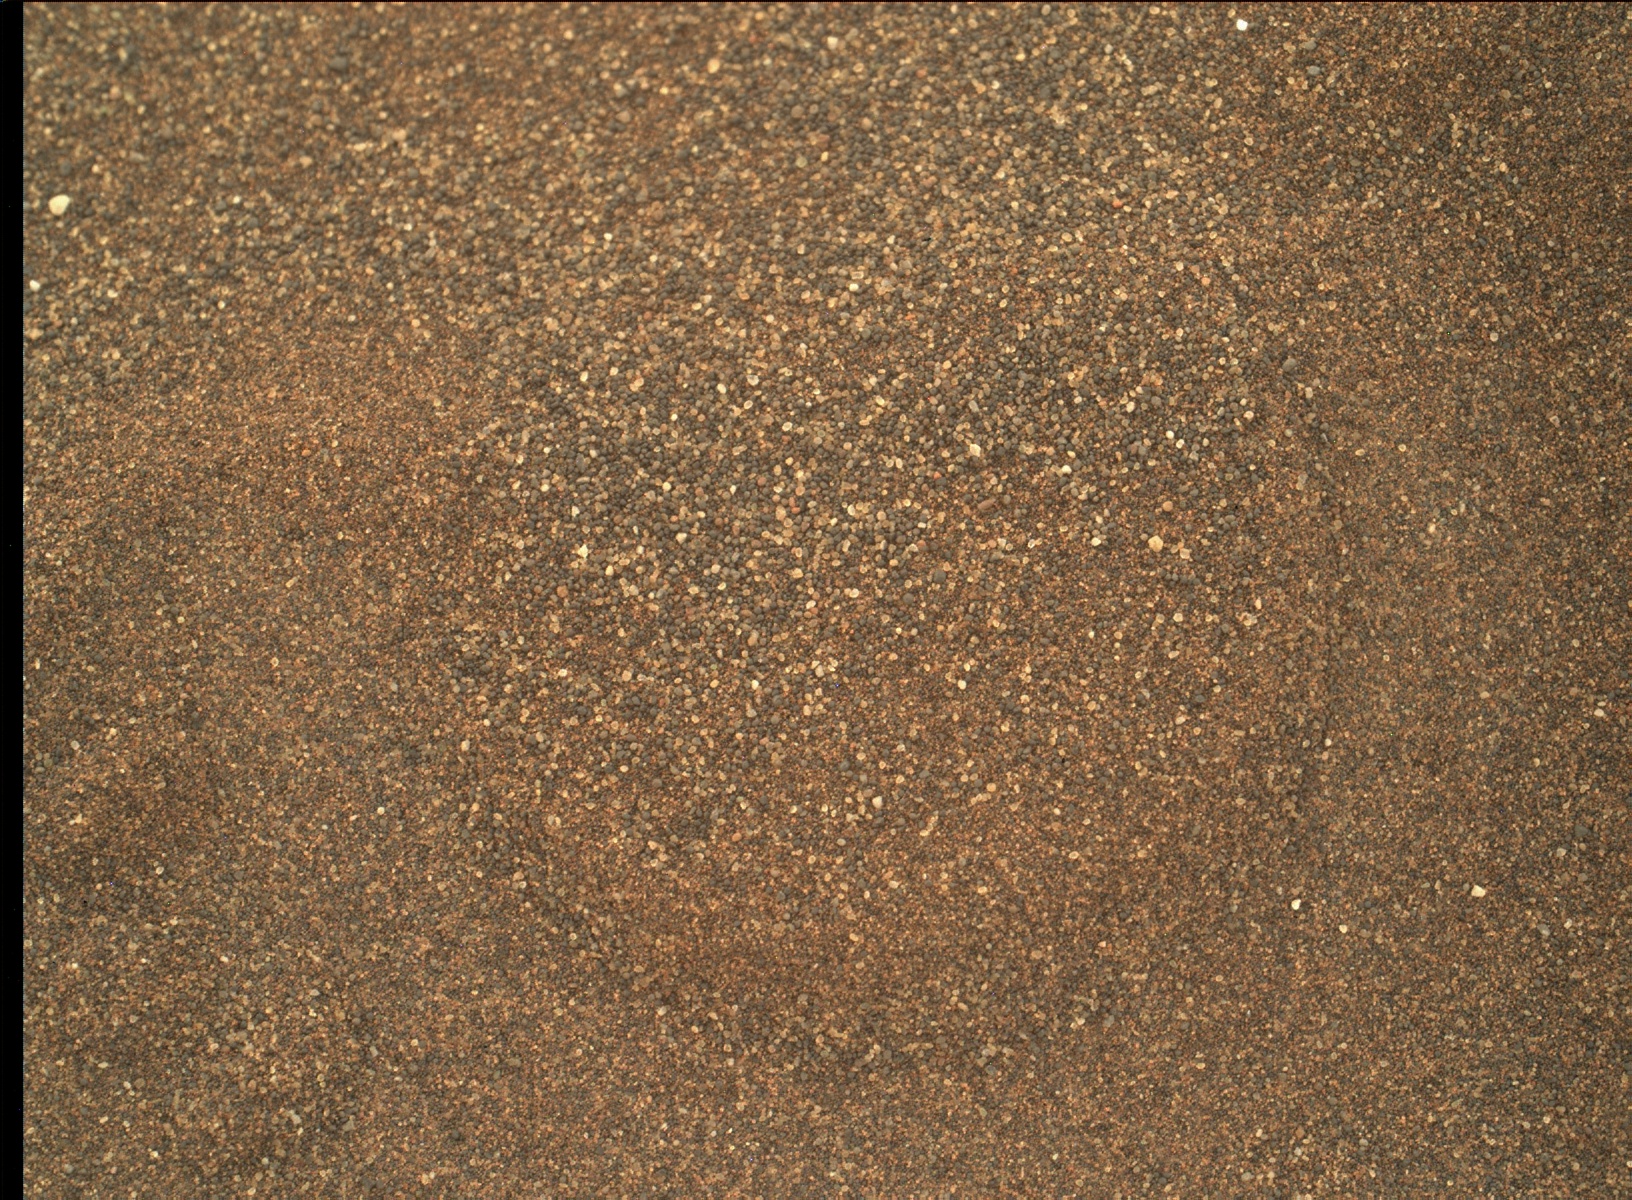 Nasa's Mars rover Curiosity acquired this image using its Mars Hand Lens Imager (MAHLI) on Sol 1651